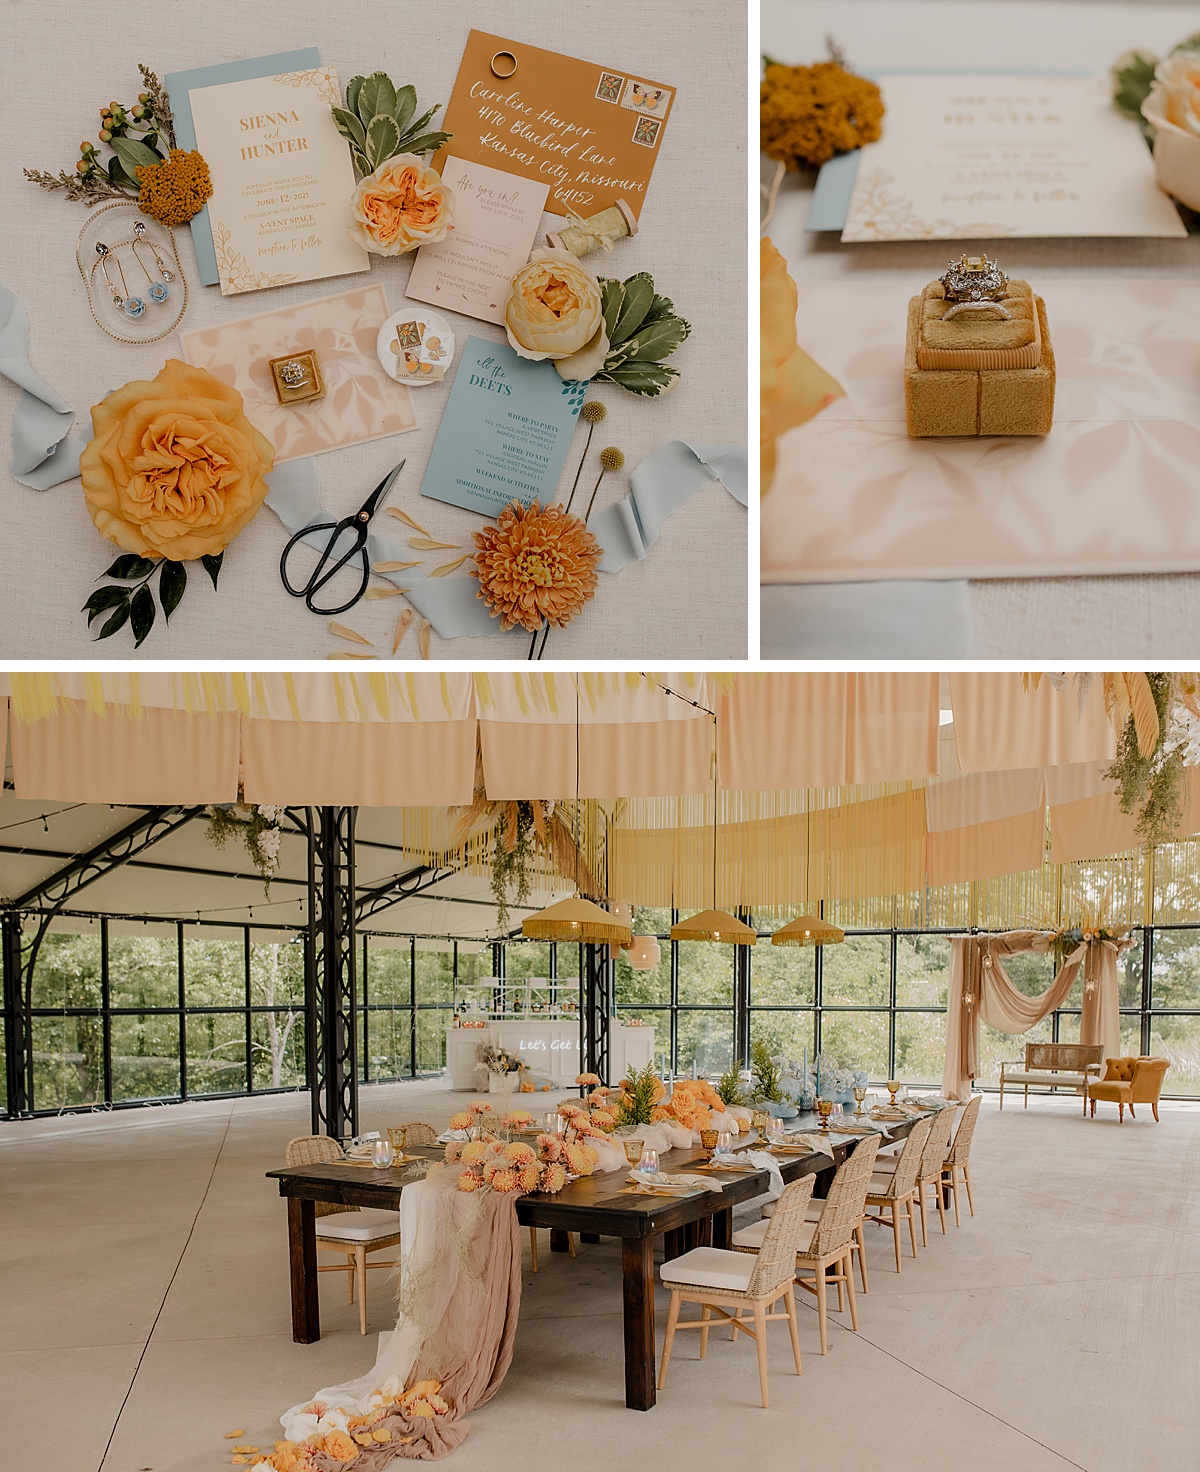 Colorful boho wedding detail flat lay, engagement ring and tablescape design from this styled branding shoot in Kansas City.